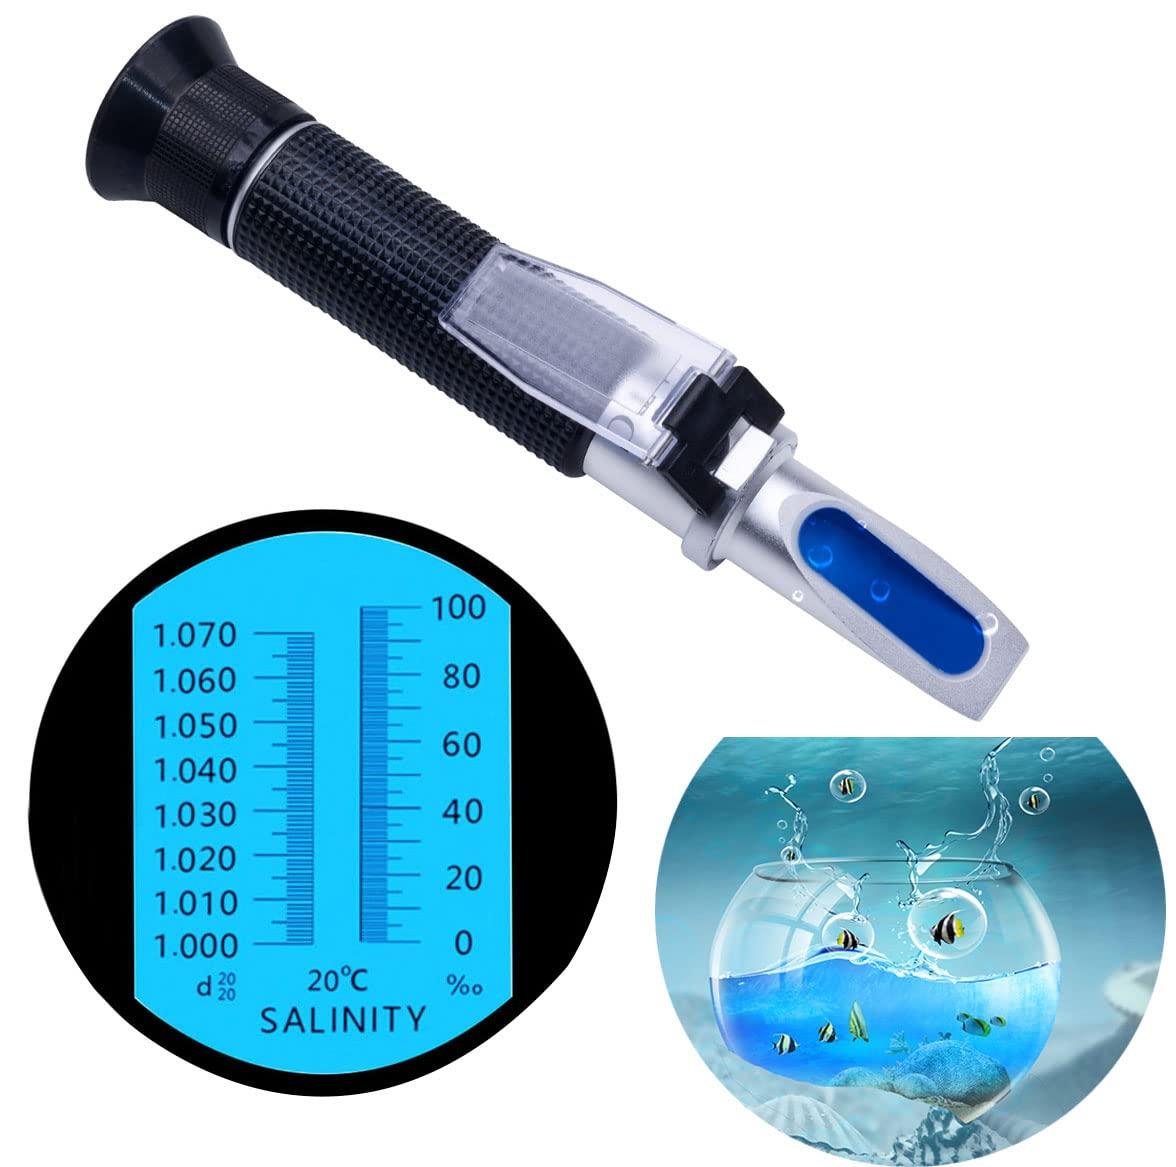 Hallocool Salinity Refractometer for Aquarium Seawater Marine Fishkeeping Saltwater Refractometer Dual Scale Specific gravity Salinity Tester 0-100A & 1000-1070 Salinity Hydrometer with ATc